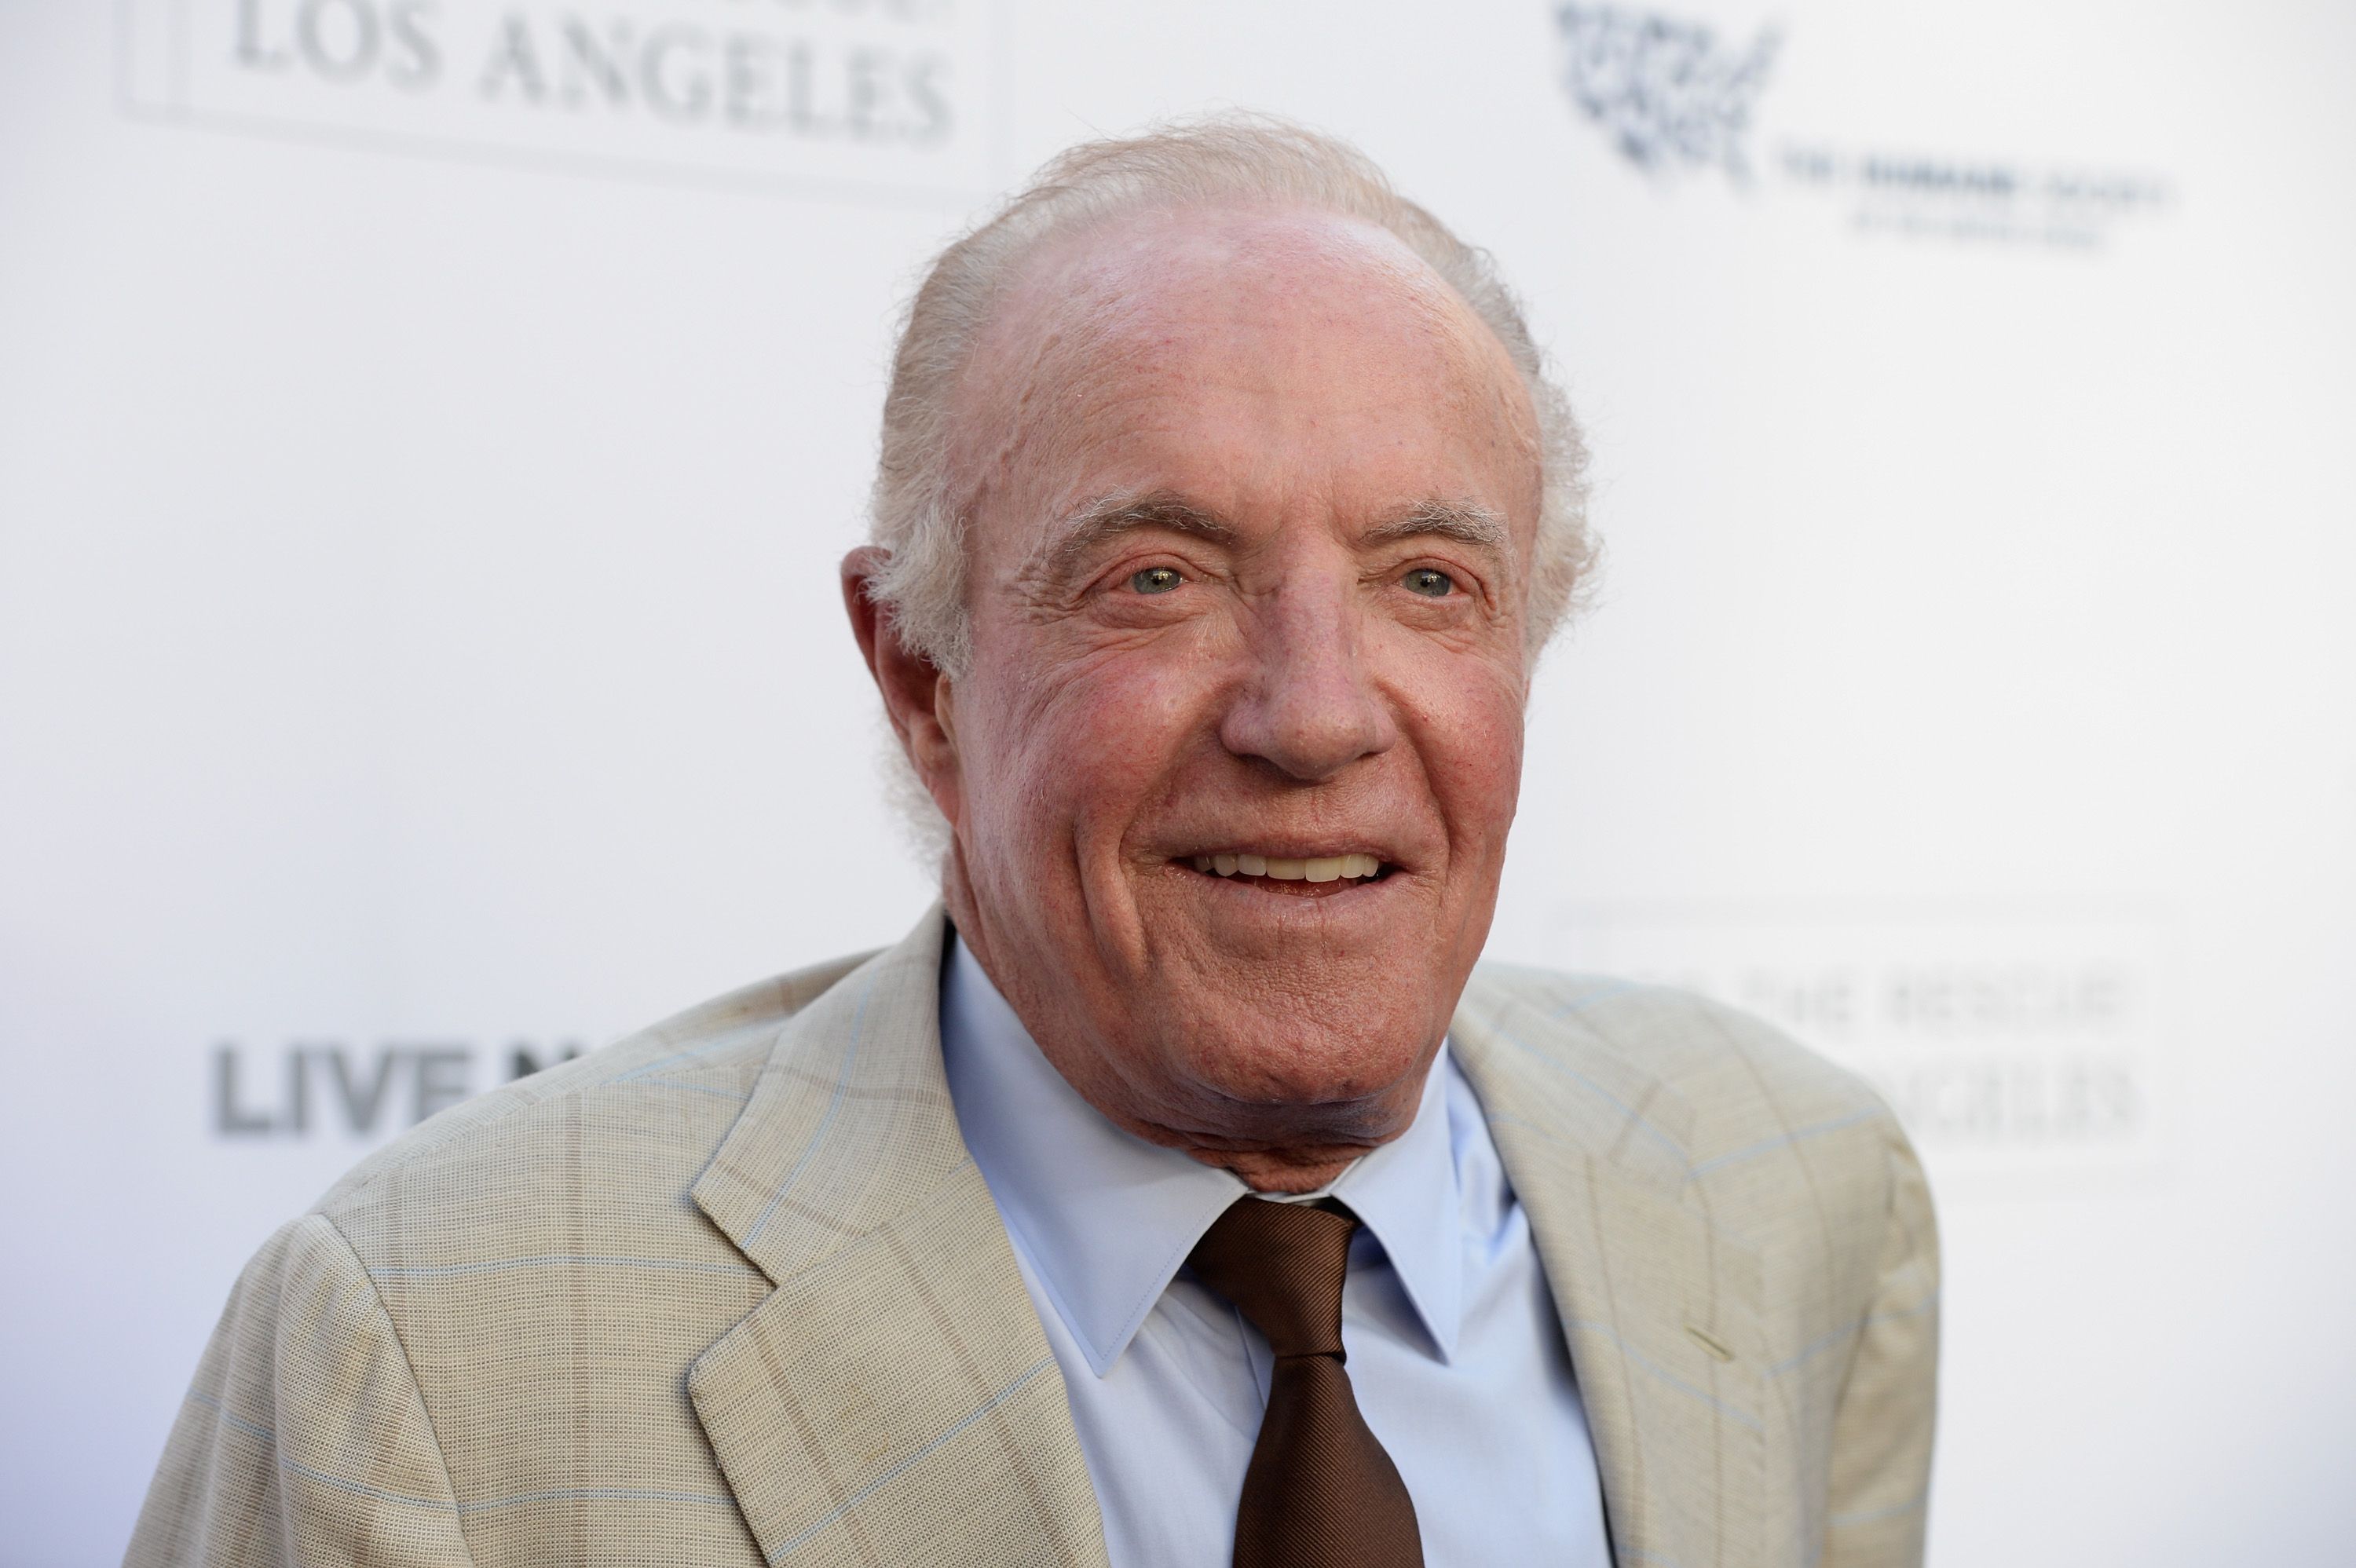 James Caan during The Humane Society of the United States' To the Rescue Los Angeles Gala at Paramount Studios on April 22, 2017 in Hollywood, California. | Source: Getty Images